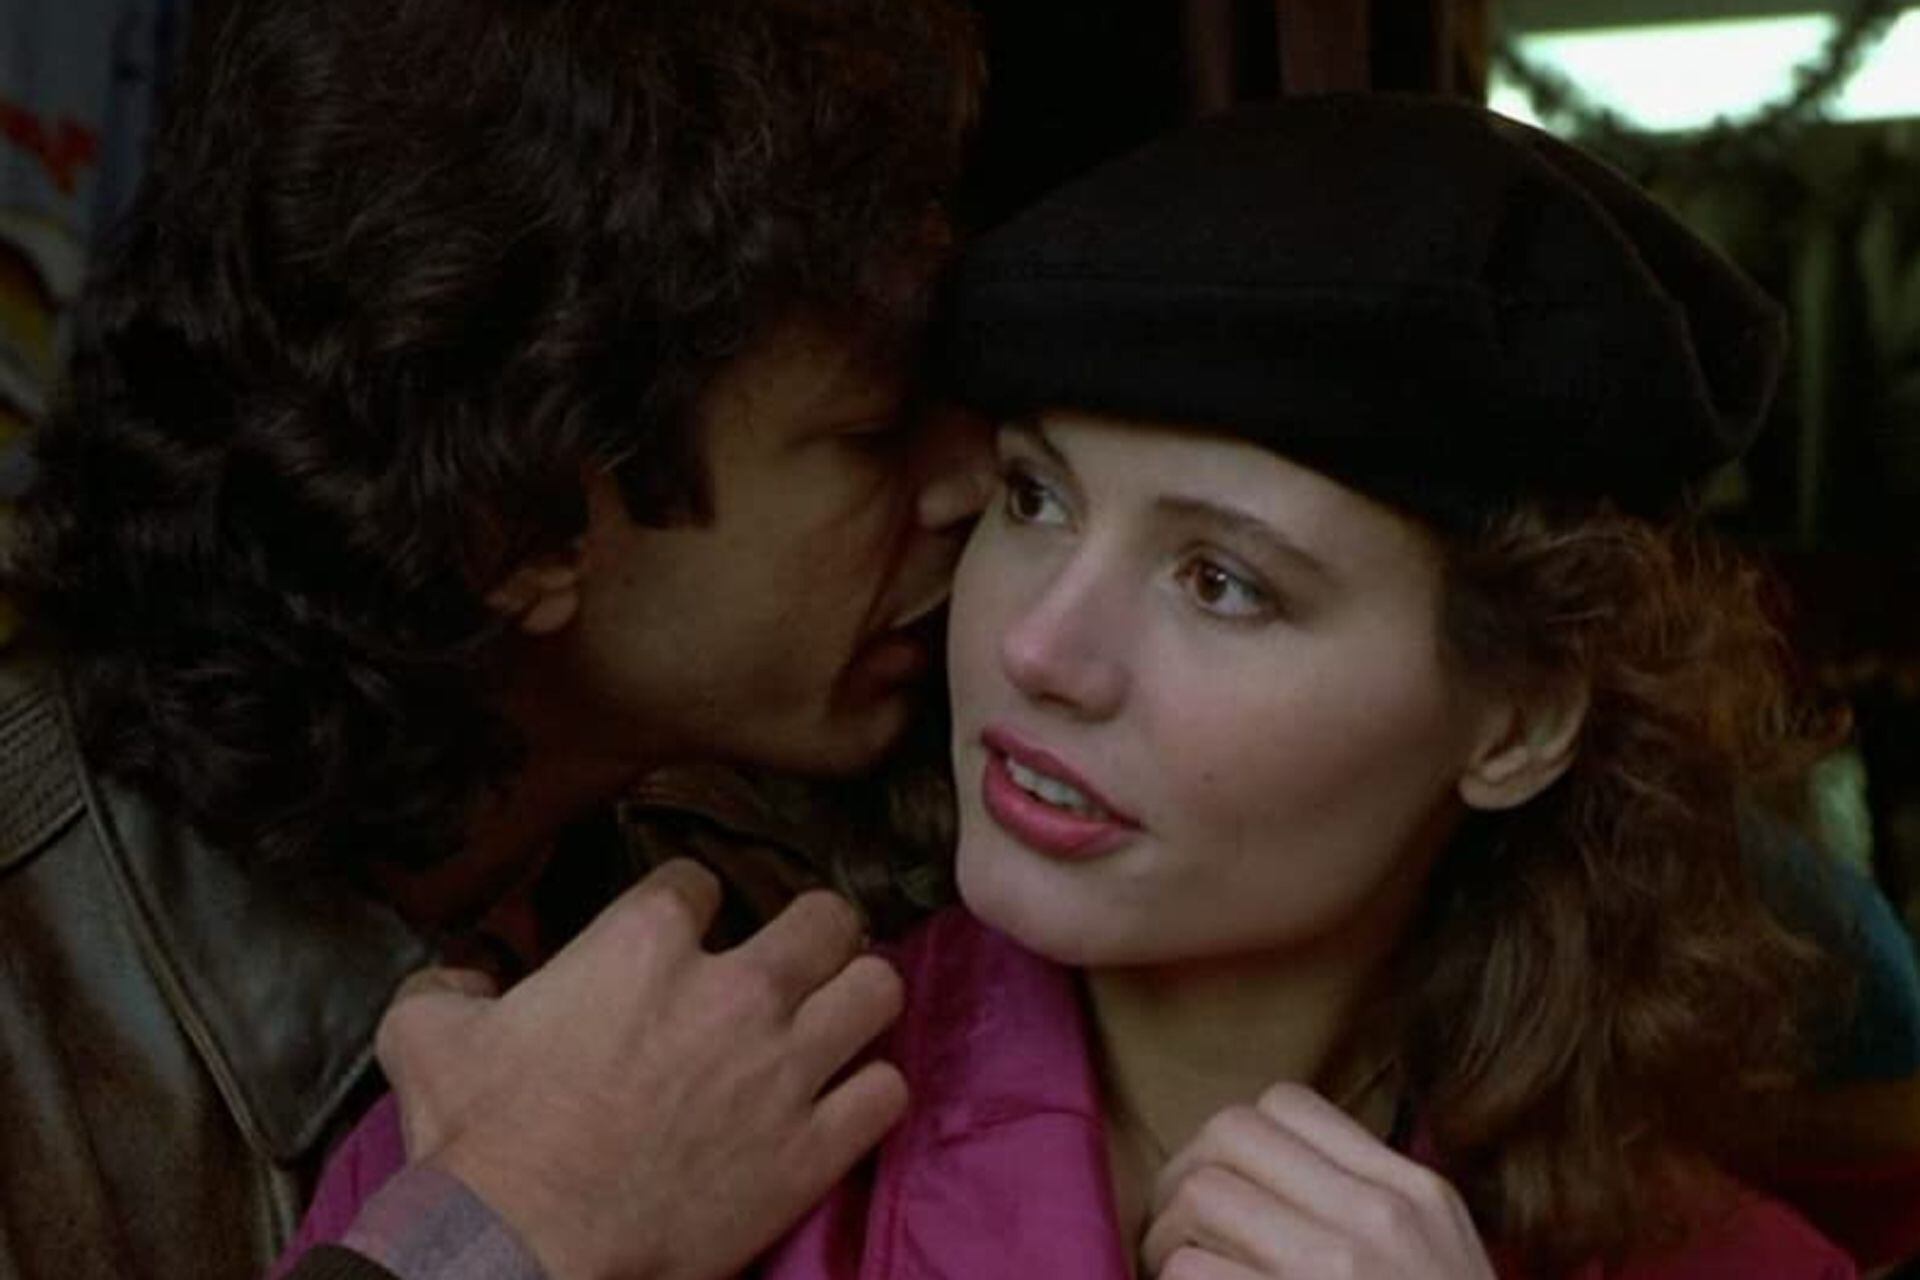 Geena Davis and Jeff Goldblum, in a scene from the film The Fly